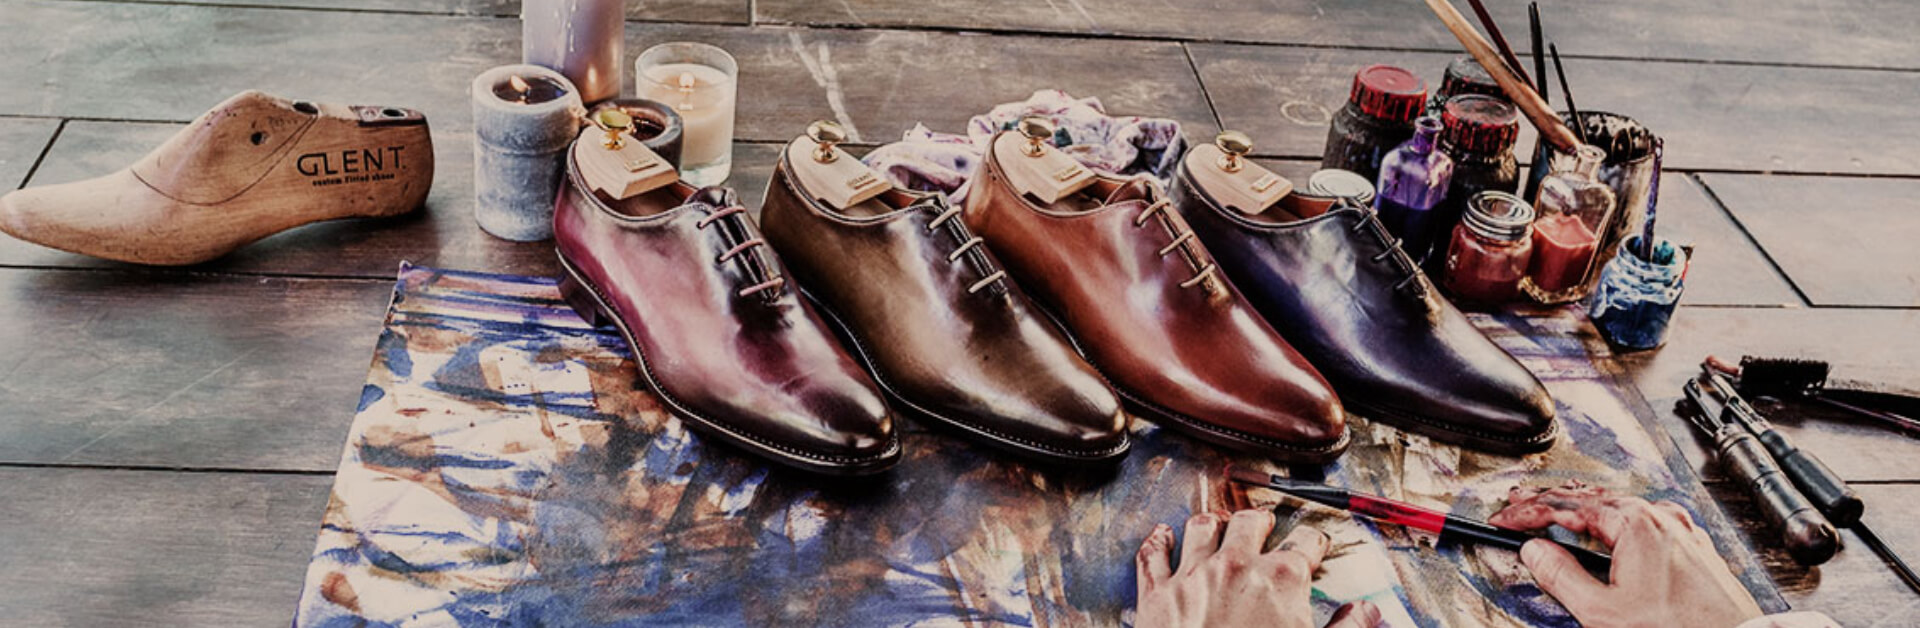 Men's shoes handmade in Spain | Glent Shoes | Glent - Zapatos a medida